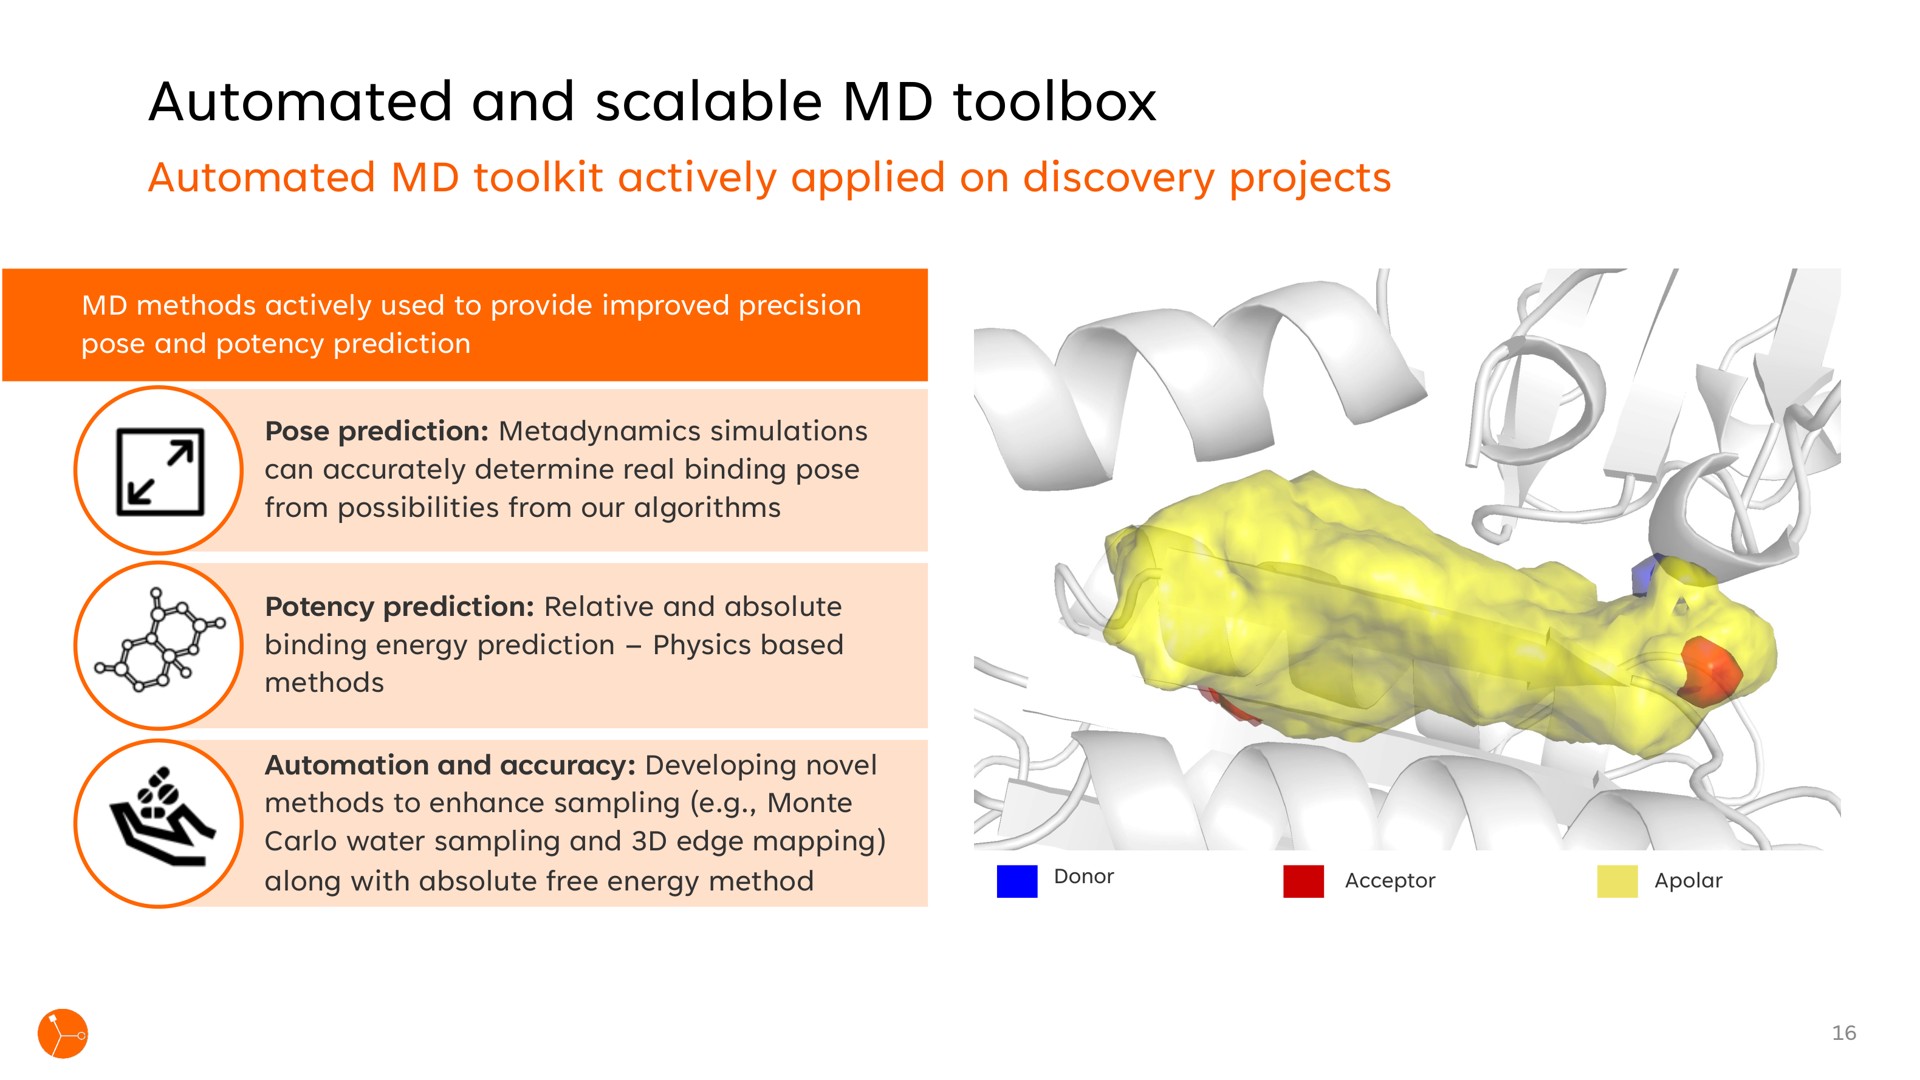 and scalable toolbox | Exscientia